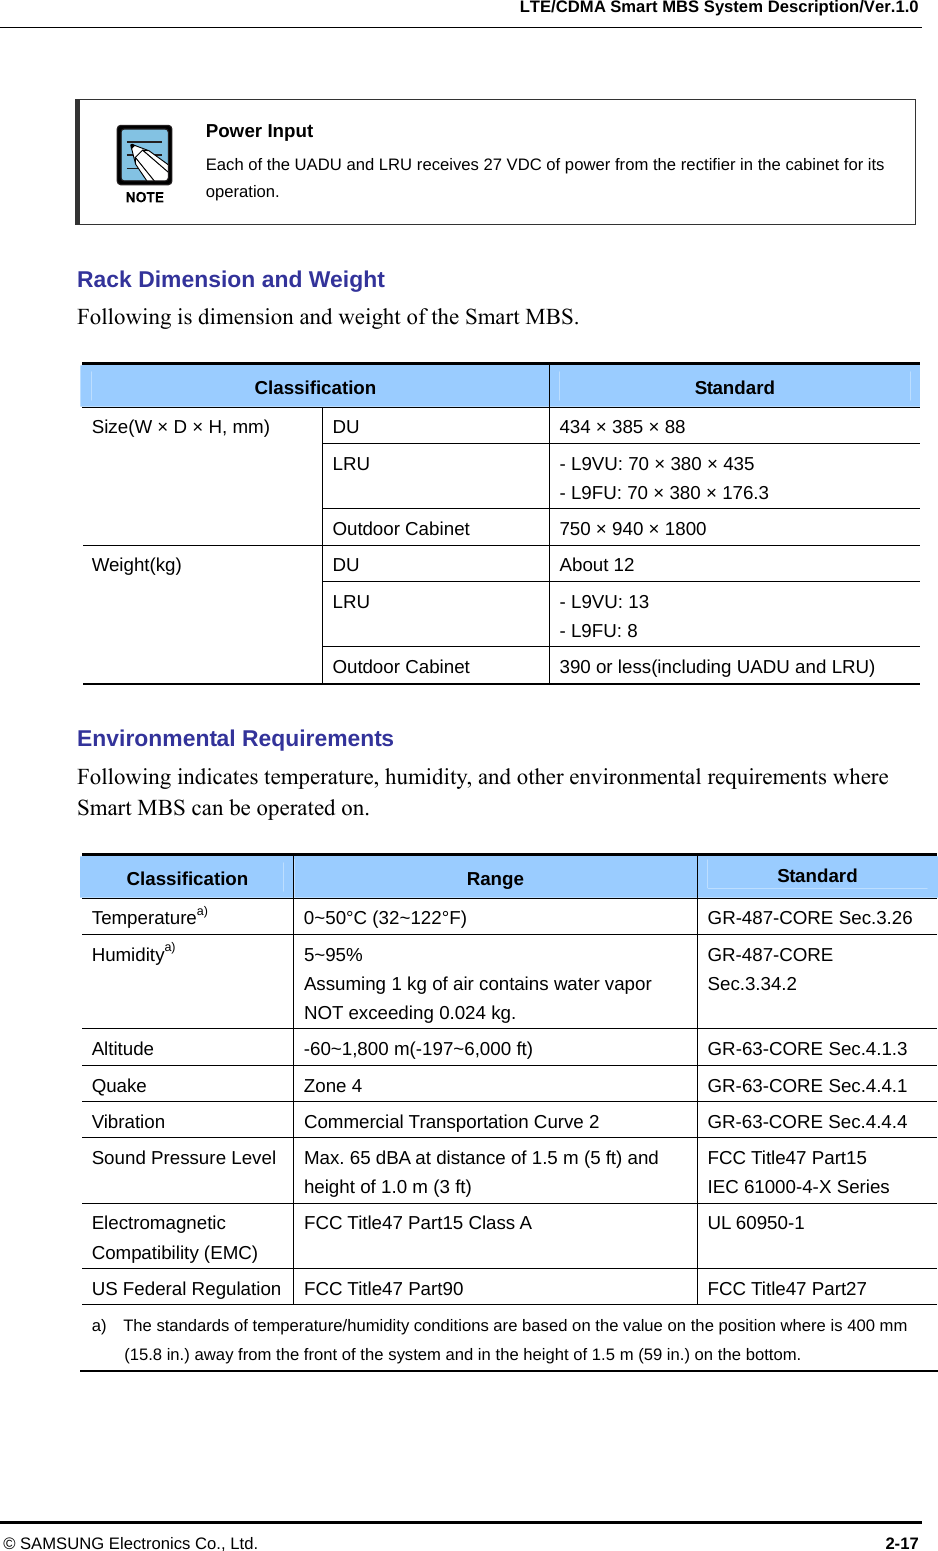   LTE/CDMA Smart MBS System Description/Ver.1.0 © SAMSUNG Electronics Co., Ltd.  2-17   Power Input  Each of the UADU and LRU receives 27 VDC of power from the rectifier in the cabinet for its operation.  Rack Dimension and Weight Following is dimension and weight of the Smart MBS.  Classification  Standard DU  434 × 385 × 88 LRU  - L9VU: 70 × 380 × 435 - L9FU: 70 × 380 × 176.3 Size(W × D × H, mm) Outdoor Cabinet  750 × 940 × 1800 DU About 12 LRU  - L9VU: 13 - L9FU: 8 Weight(kg) Outdoor Cabinet  390 or less(including UADU and LRU)  Environmental Requirements Following indicates temperature, humidity, and other environmental requirements where Smart MBS can be operated on.  Classification  Range  Standard Temperaturea)  0~50°C (32~122°F)  GR-487-CORE Sec.3.26 Humiditya) 5~95%  Assuming 1 kg of air contains water vapor NOT exceeding 0.024 kg. GR-487-CORE Sec.3.34.2 Altitude -60~1,800 m(-197~6,000 ft)  GR-63-CORE Sec.4.1.3 Quake   Zone 4  GR-63-CORE Sec.4.4.1 Vibration Commercial Transportation Curve 2  GR-63-CORE Sec.4.4.4 Sound Pressure Level  Max. 65 dBA at distance of 1.5 m (5 ft) and height of 1.0 m (3 ft) FCC Title47 Part15 IEC 61000-4-X Series Electromagnetic Compatibility (EMC) FCC Title47 Part15 Class A  UL 60950-1 US Federal Regulation  FCC Title47 Part90  FCC Title47 Part27 a)    The standards of temperature/humidity conditions are based on the value on the position where is 400 mm (15.8 in.) away from the front of the system and in the height of 1.5 m (59 in.) on the bottom. 